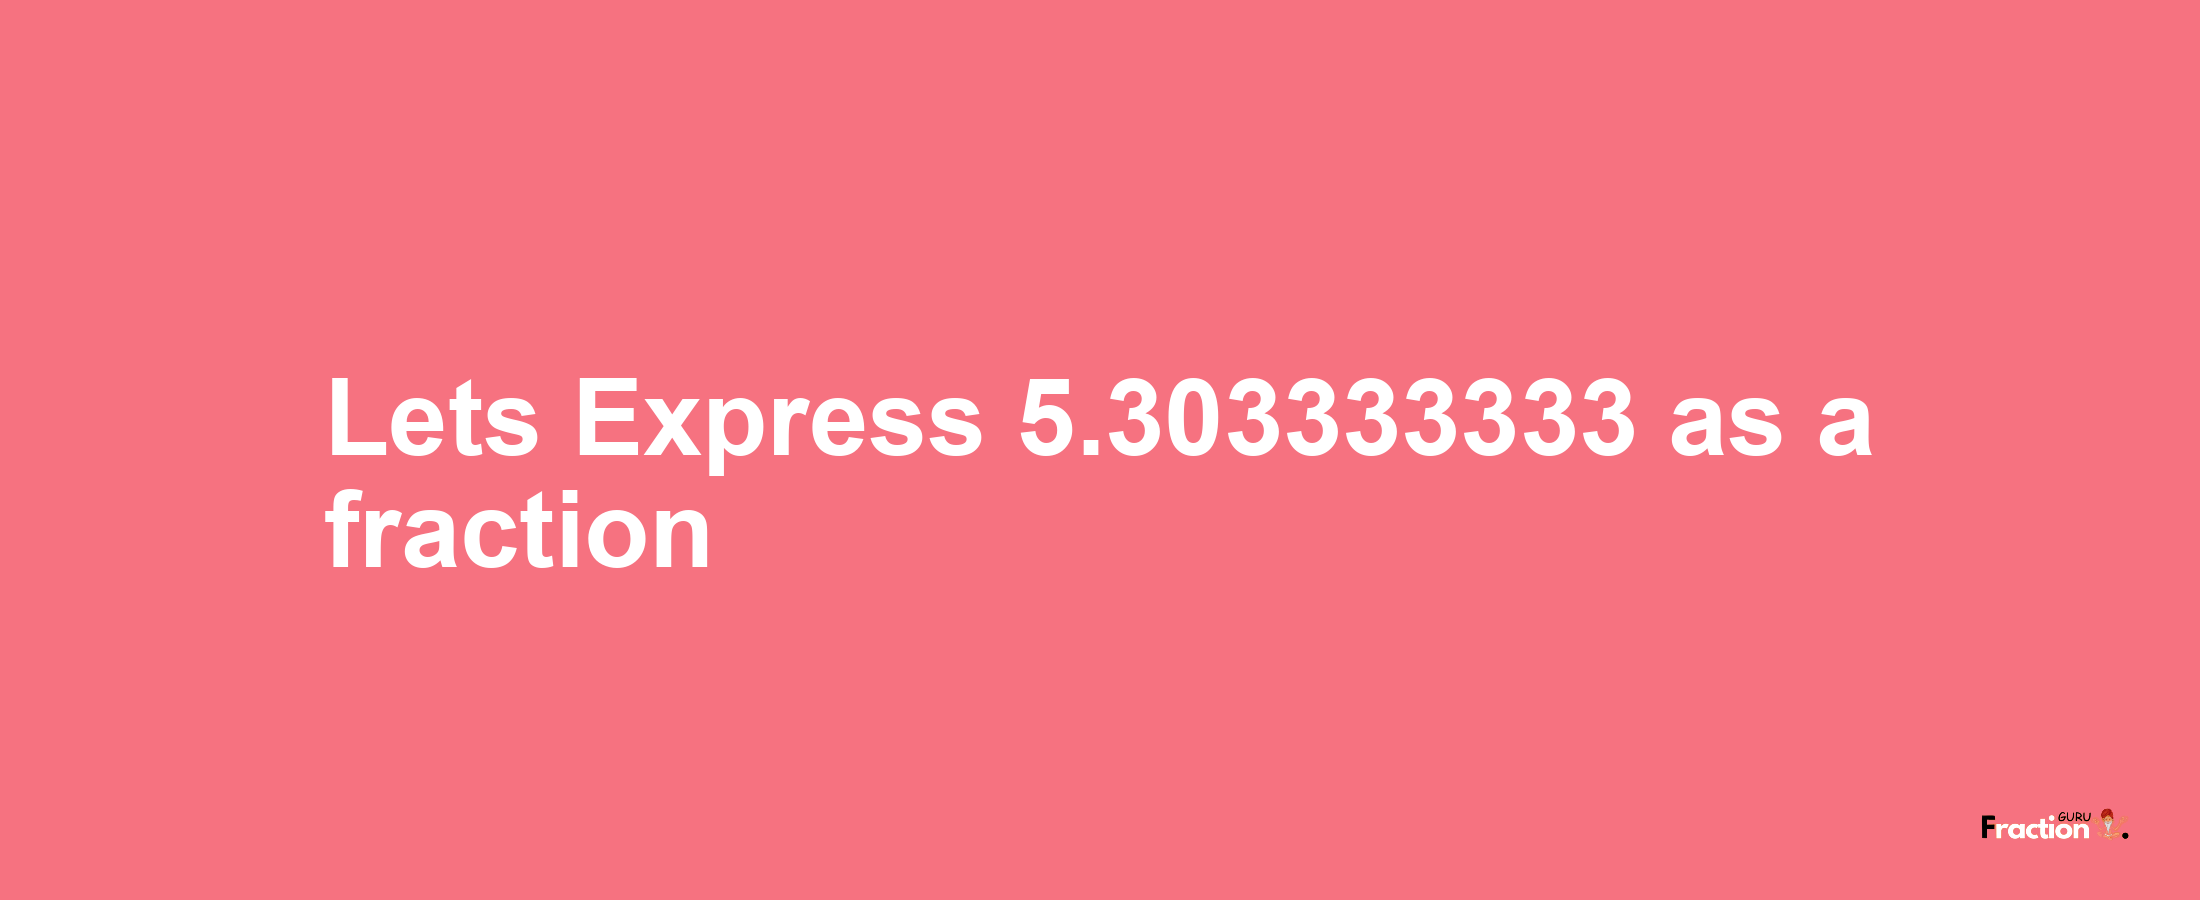 Lets Express 5.303333333 as afraction